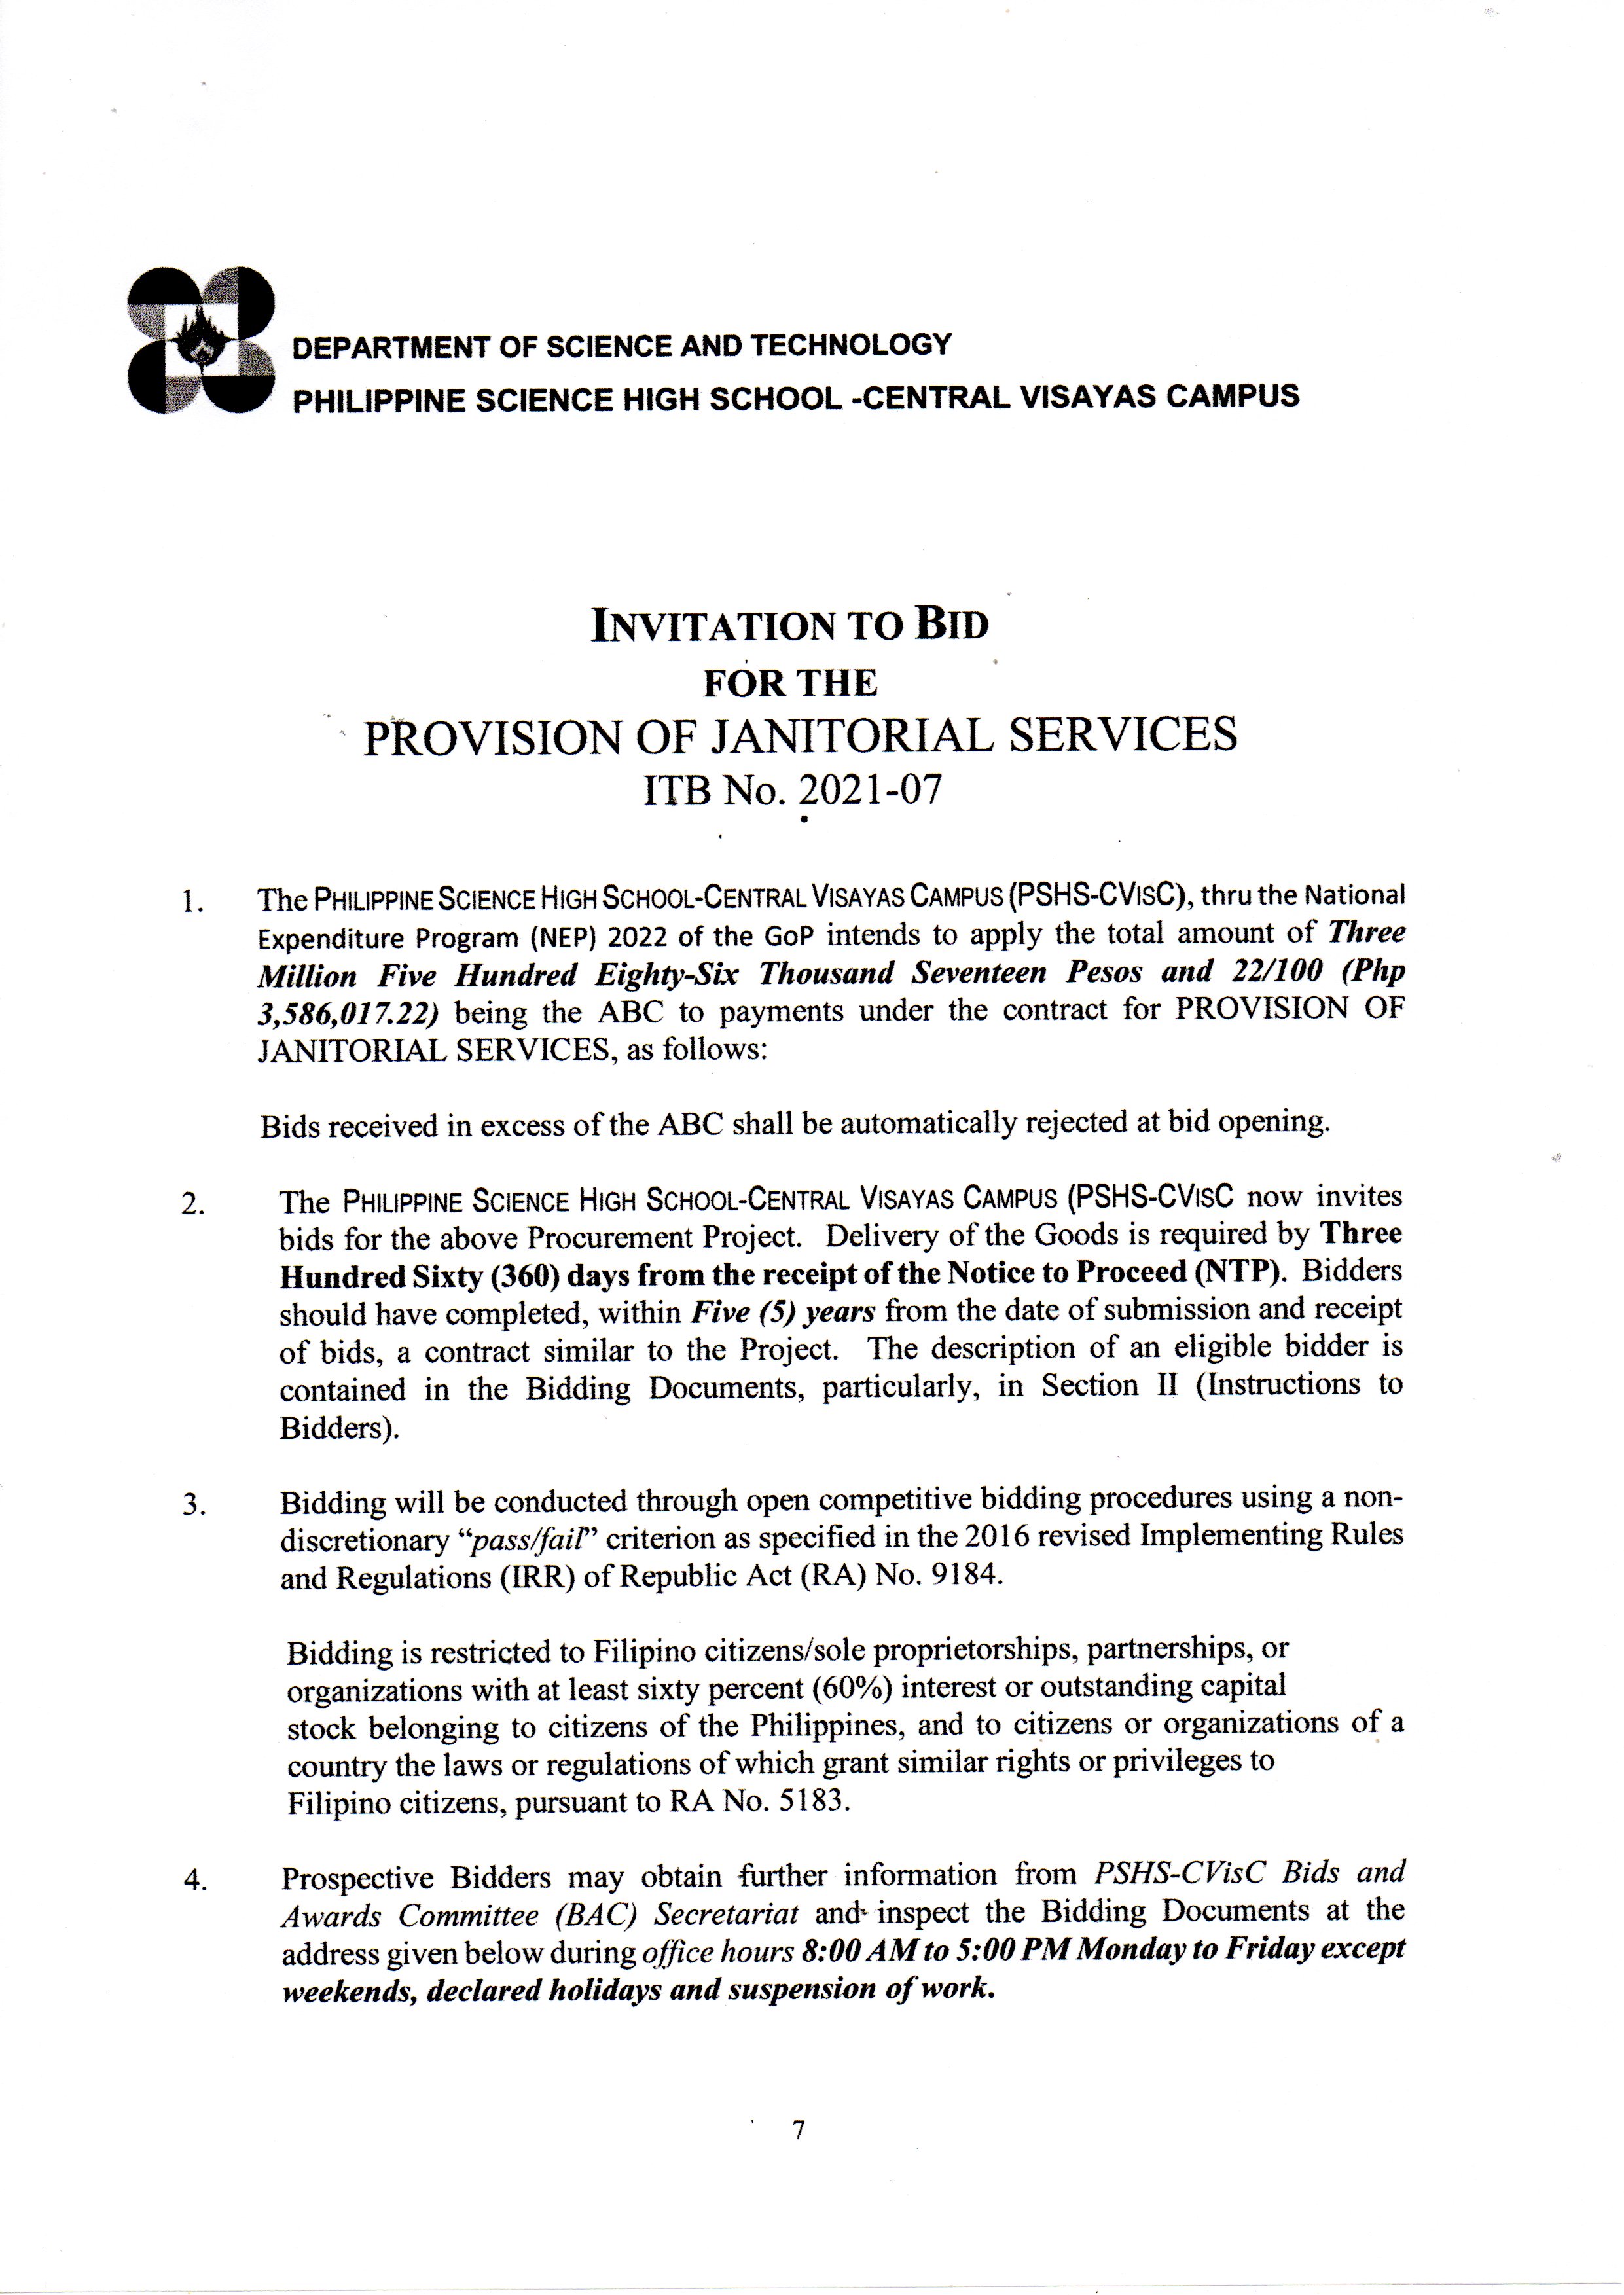 itb provision janitorial services p3